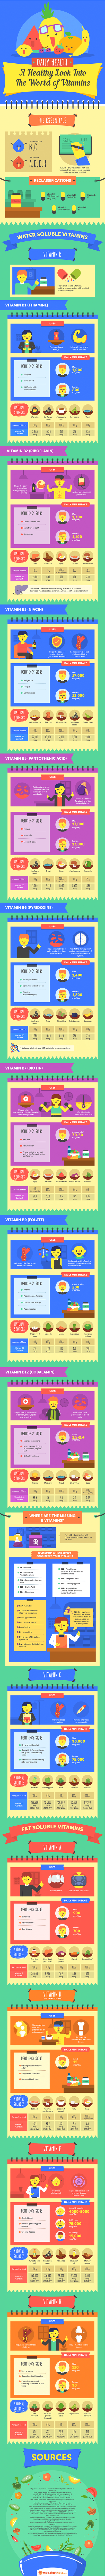 A Healthy Look Into the World of Vitamins (Infographic)